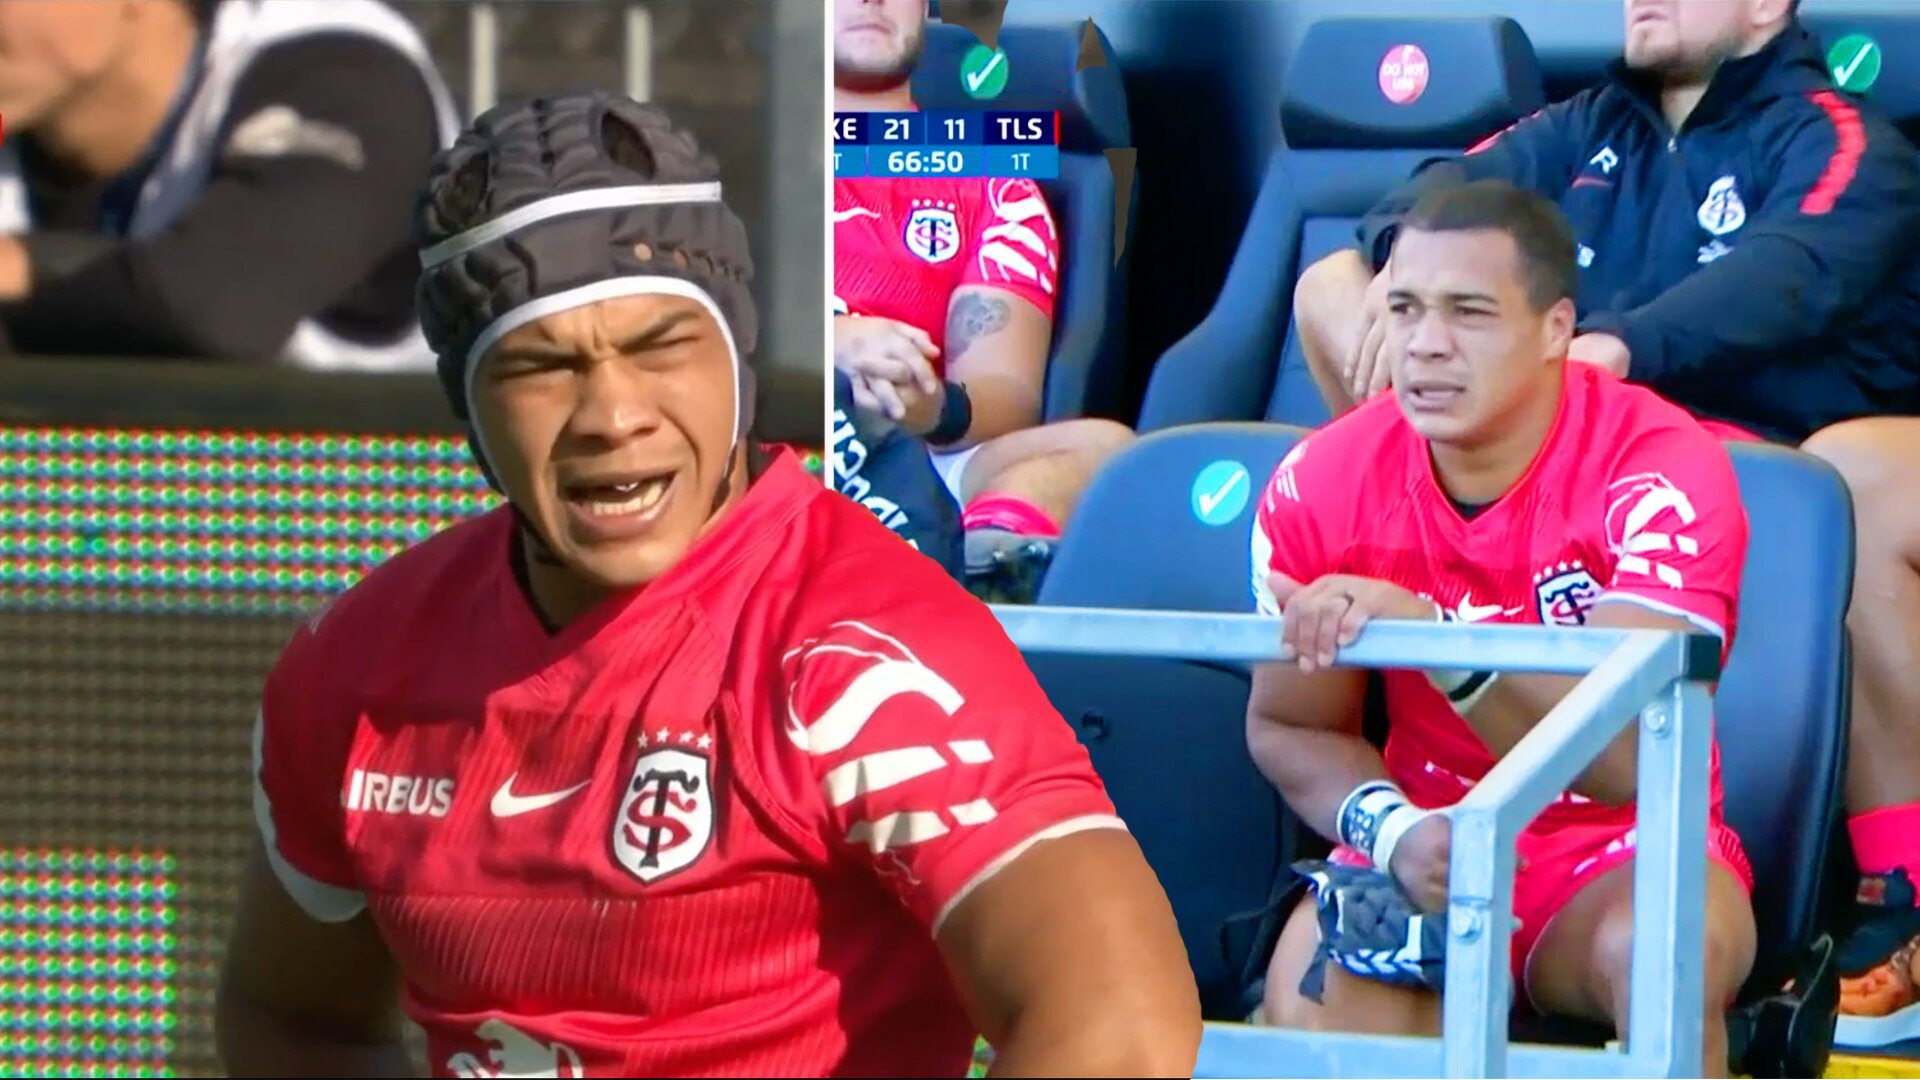 South Africa's injury crisis worsens as Cheslin Kolbe hobbles off during Champions Cup clash